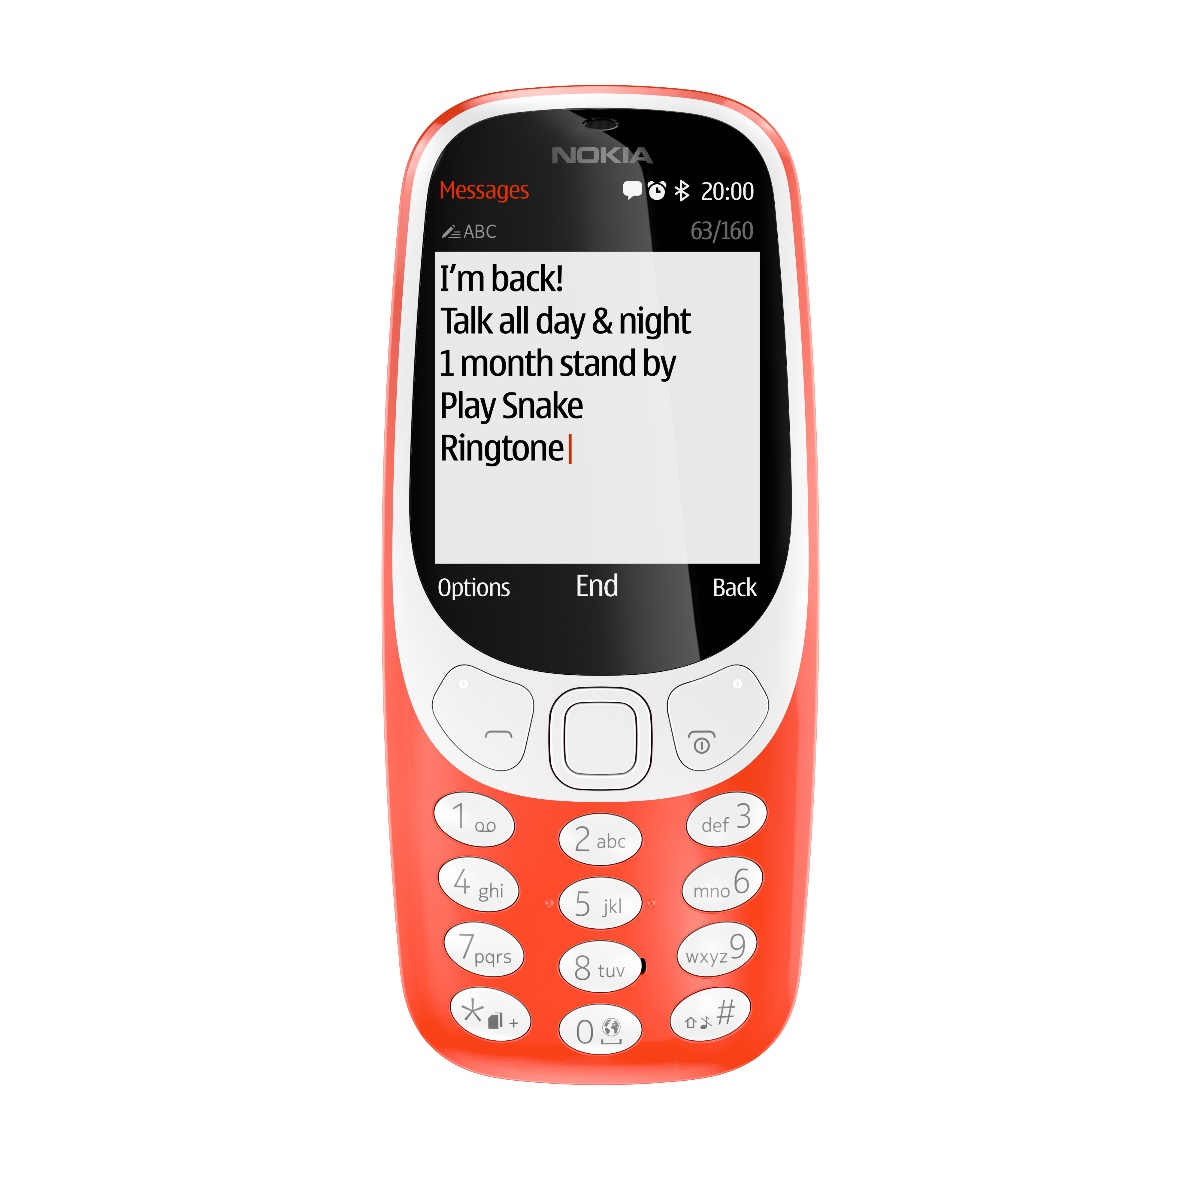 The Nokia 3310 Is Back And It Is Now Available In Nigeria!